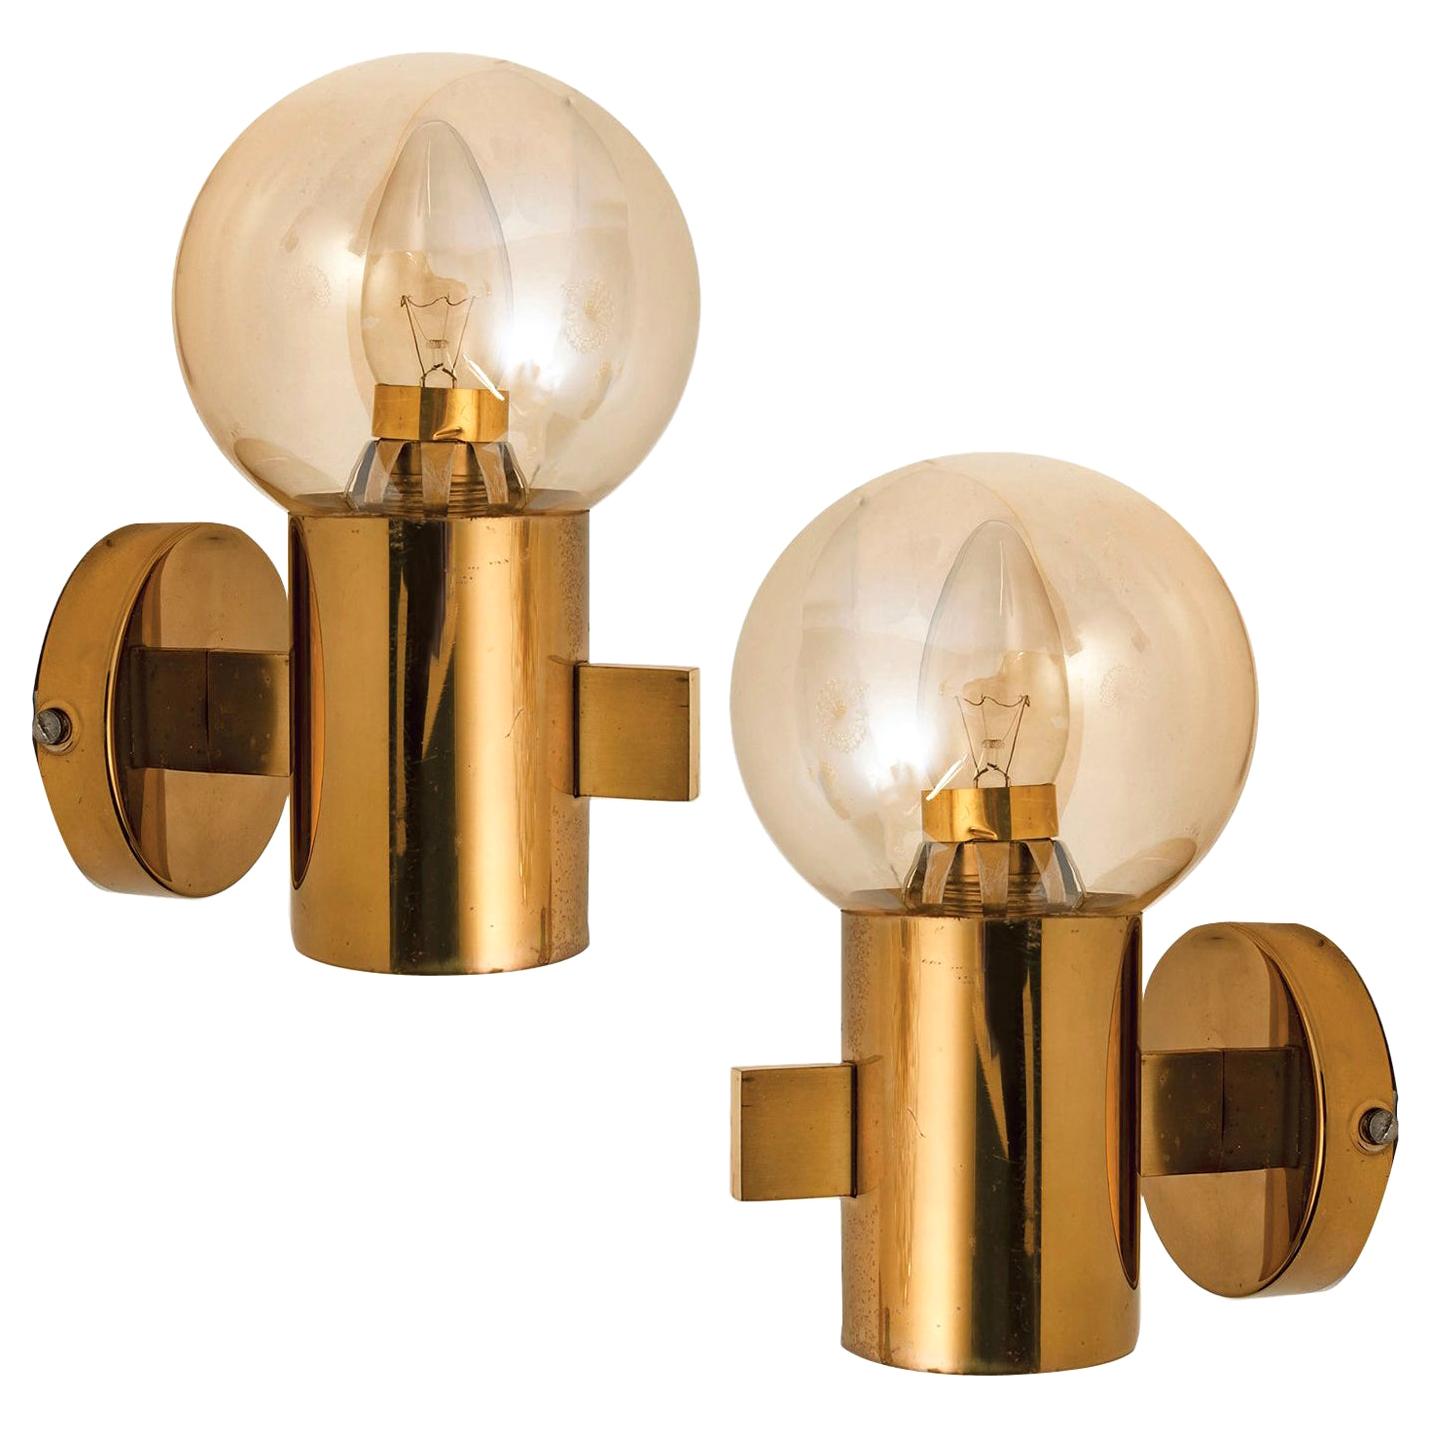 This stunning pair of brass wall light with smoked glass bowls and gold-plated fittings was produced in the 1970s by Hans-Agne Jakobsson. Design executed with a taste for excellence in craftsmanship.

We offer also a flushmount, up to 5 globes in